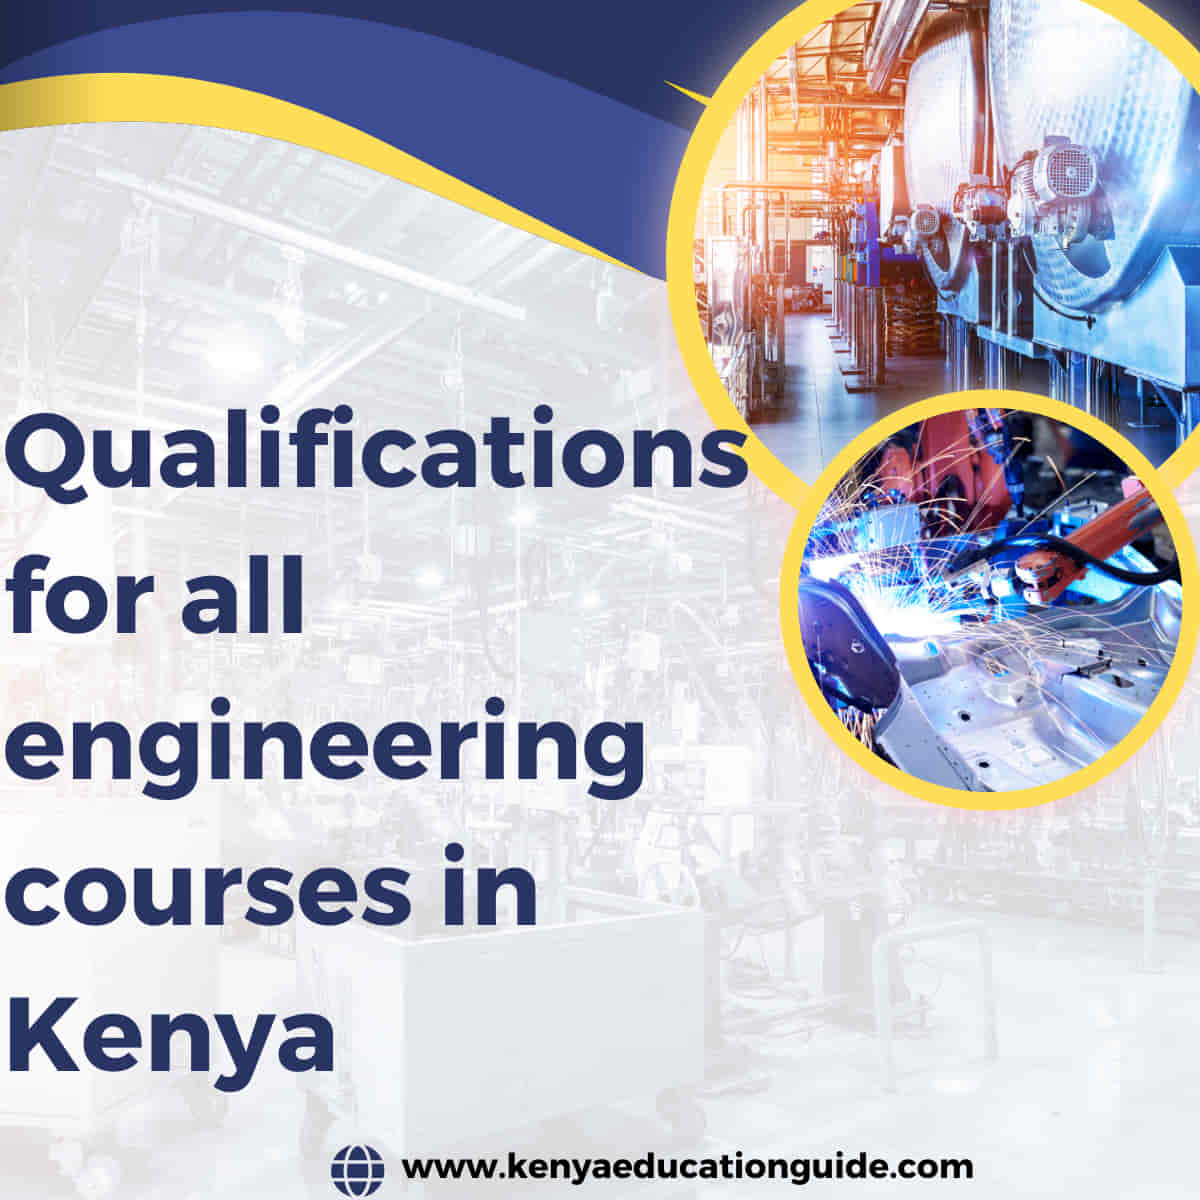 Qualifications for engineering courses in Kenya